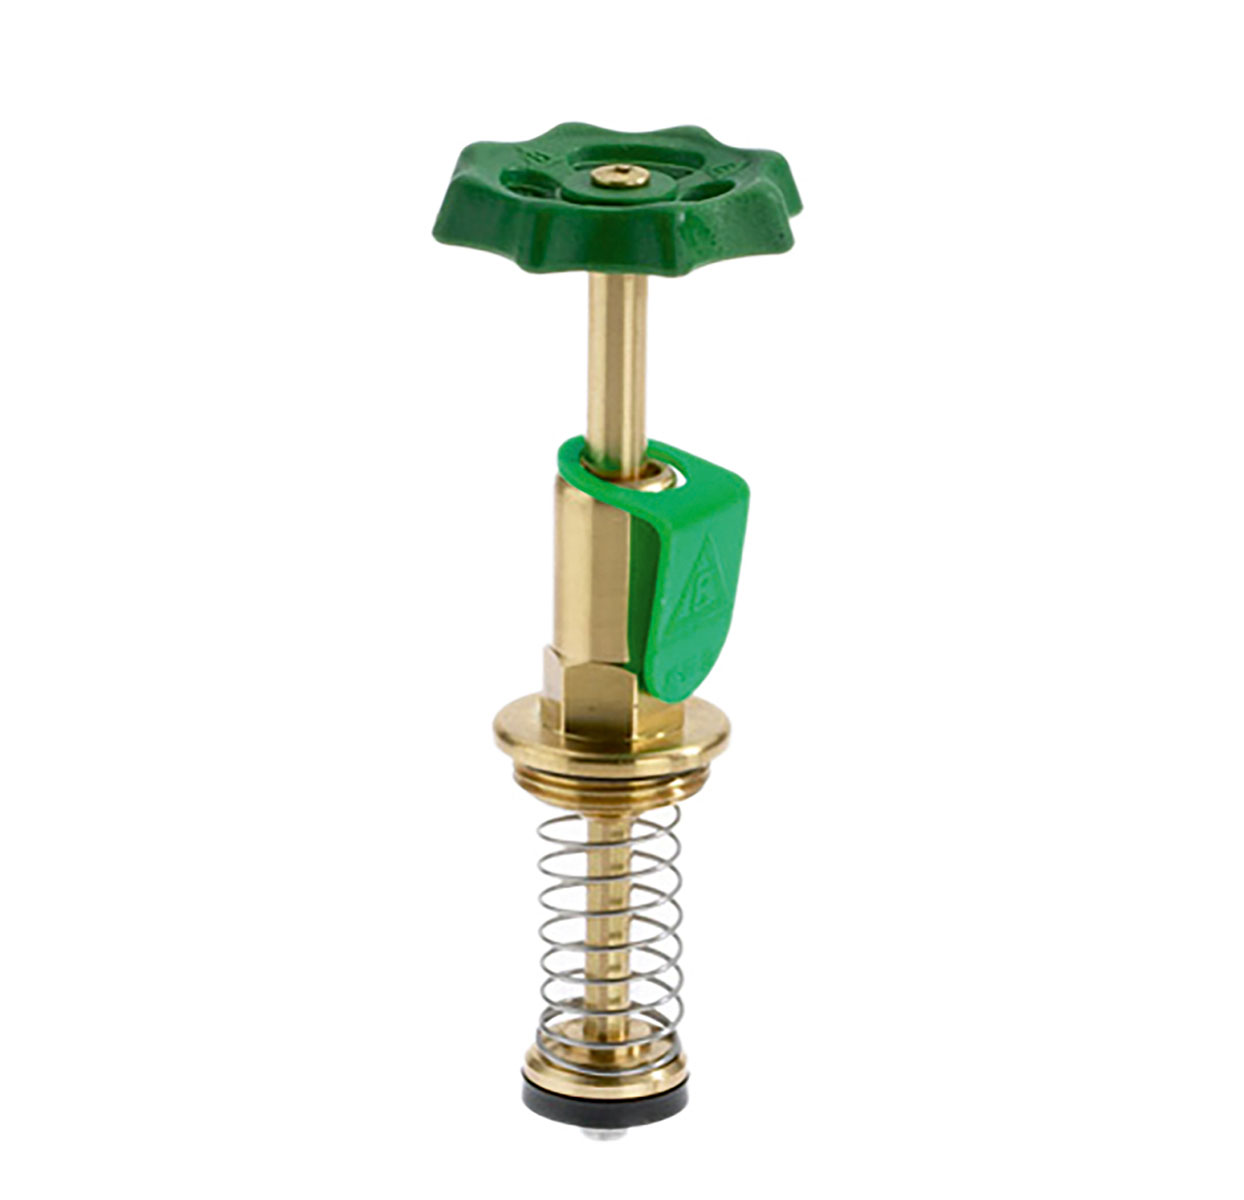 1213400 - Brass Upper-part with grease chamber for Combined Free-flow and Backflow-preventer valves, risinge Spindel